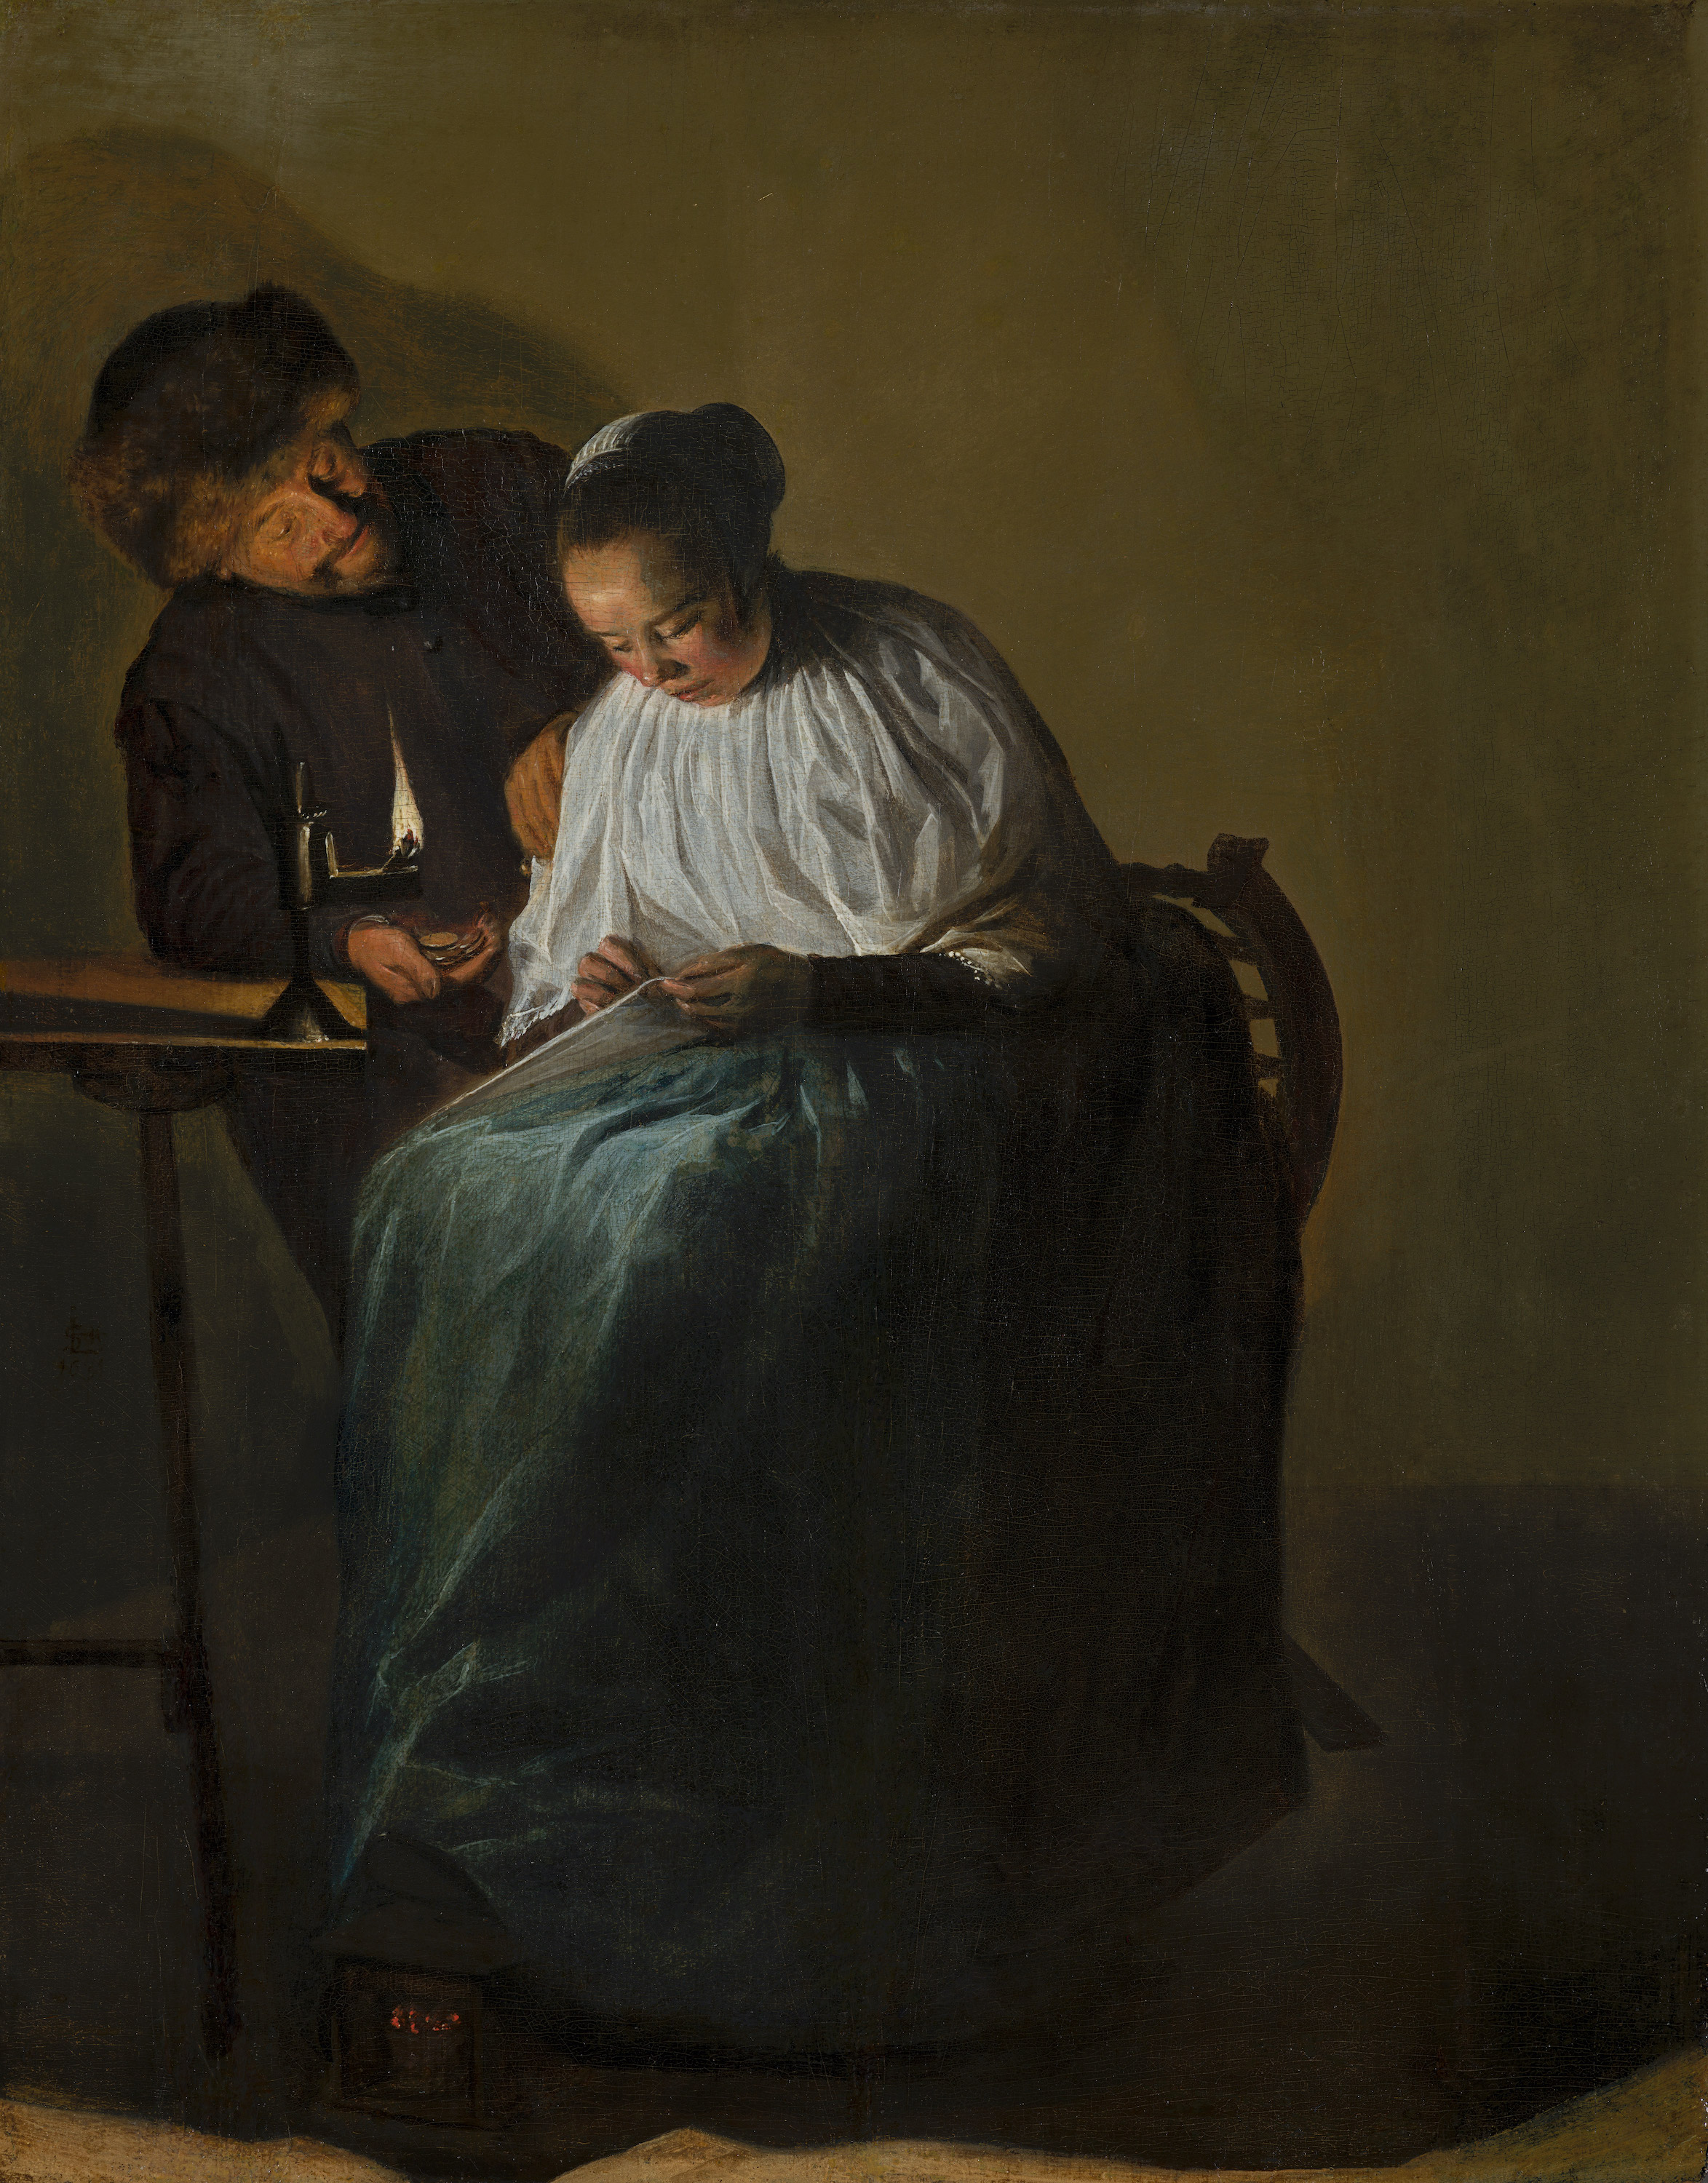 Man Offering Money to a Young Woman by Judith Leyster - 1631 - 30.8 x 24.2 cm Mauritshuis, The Hague